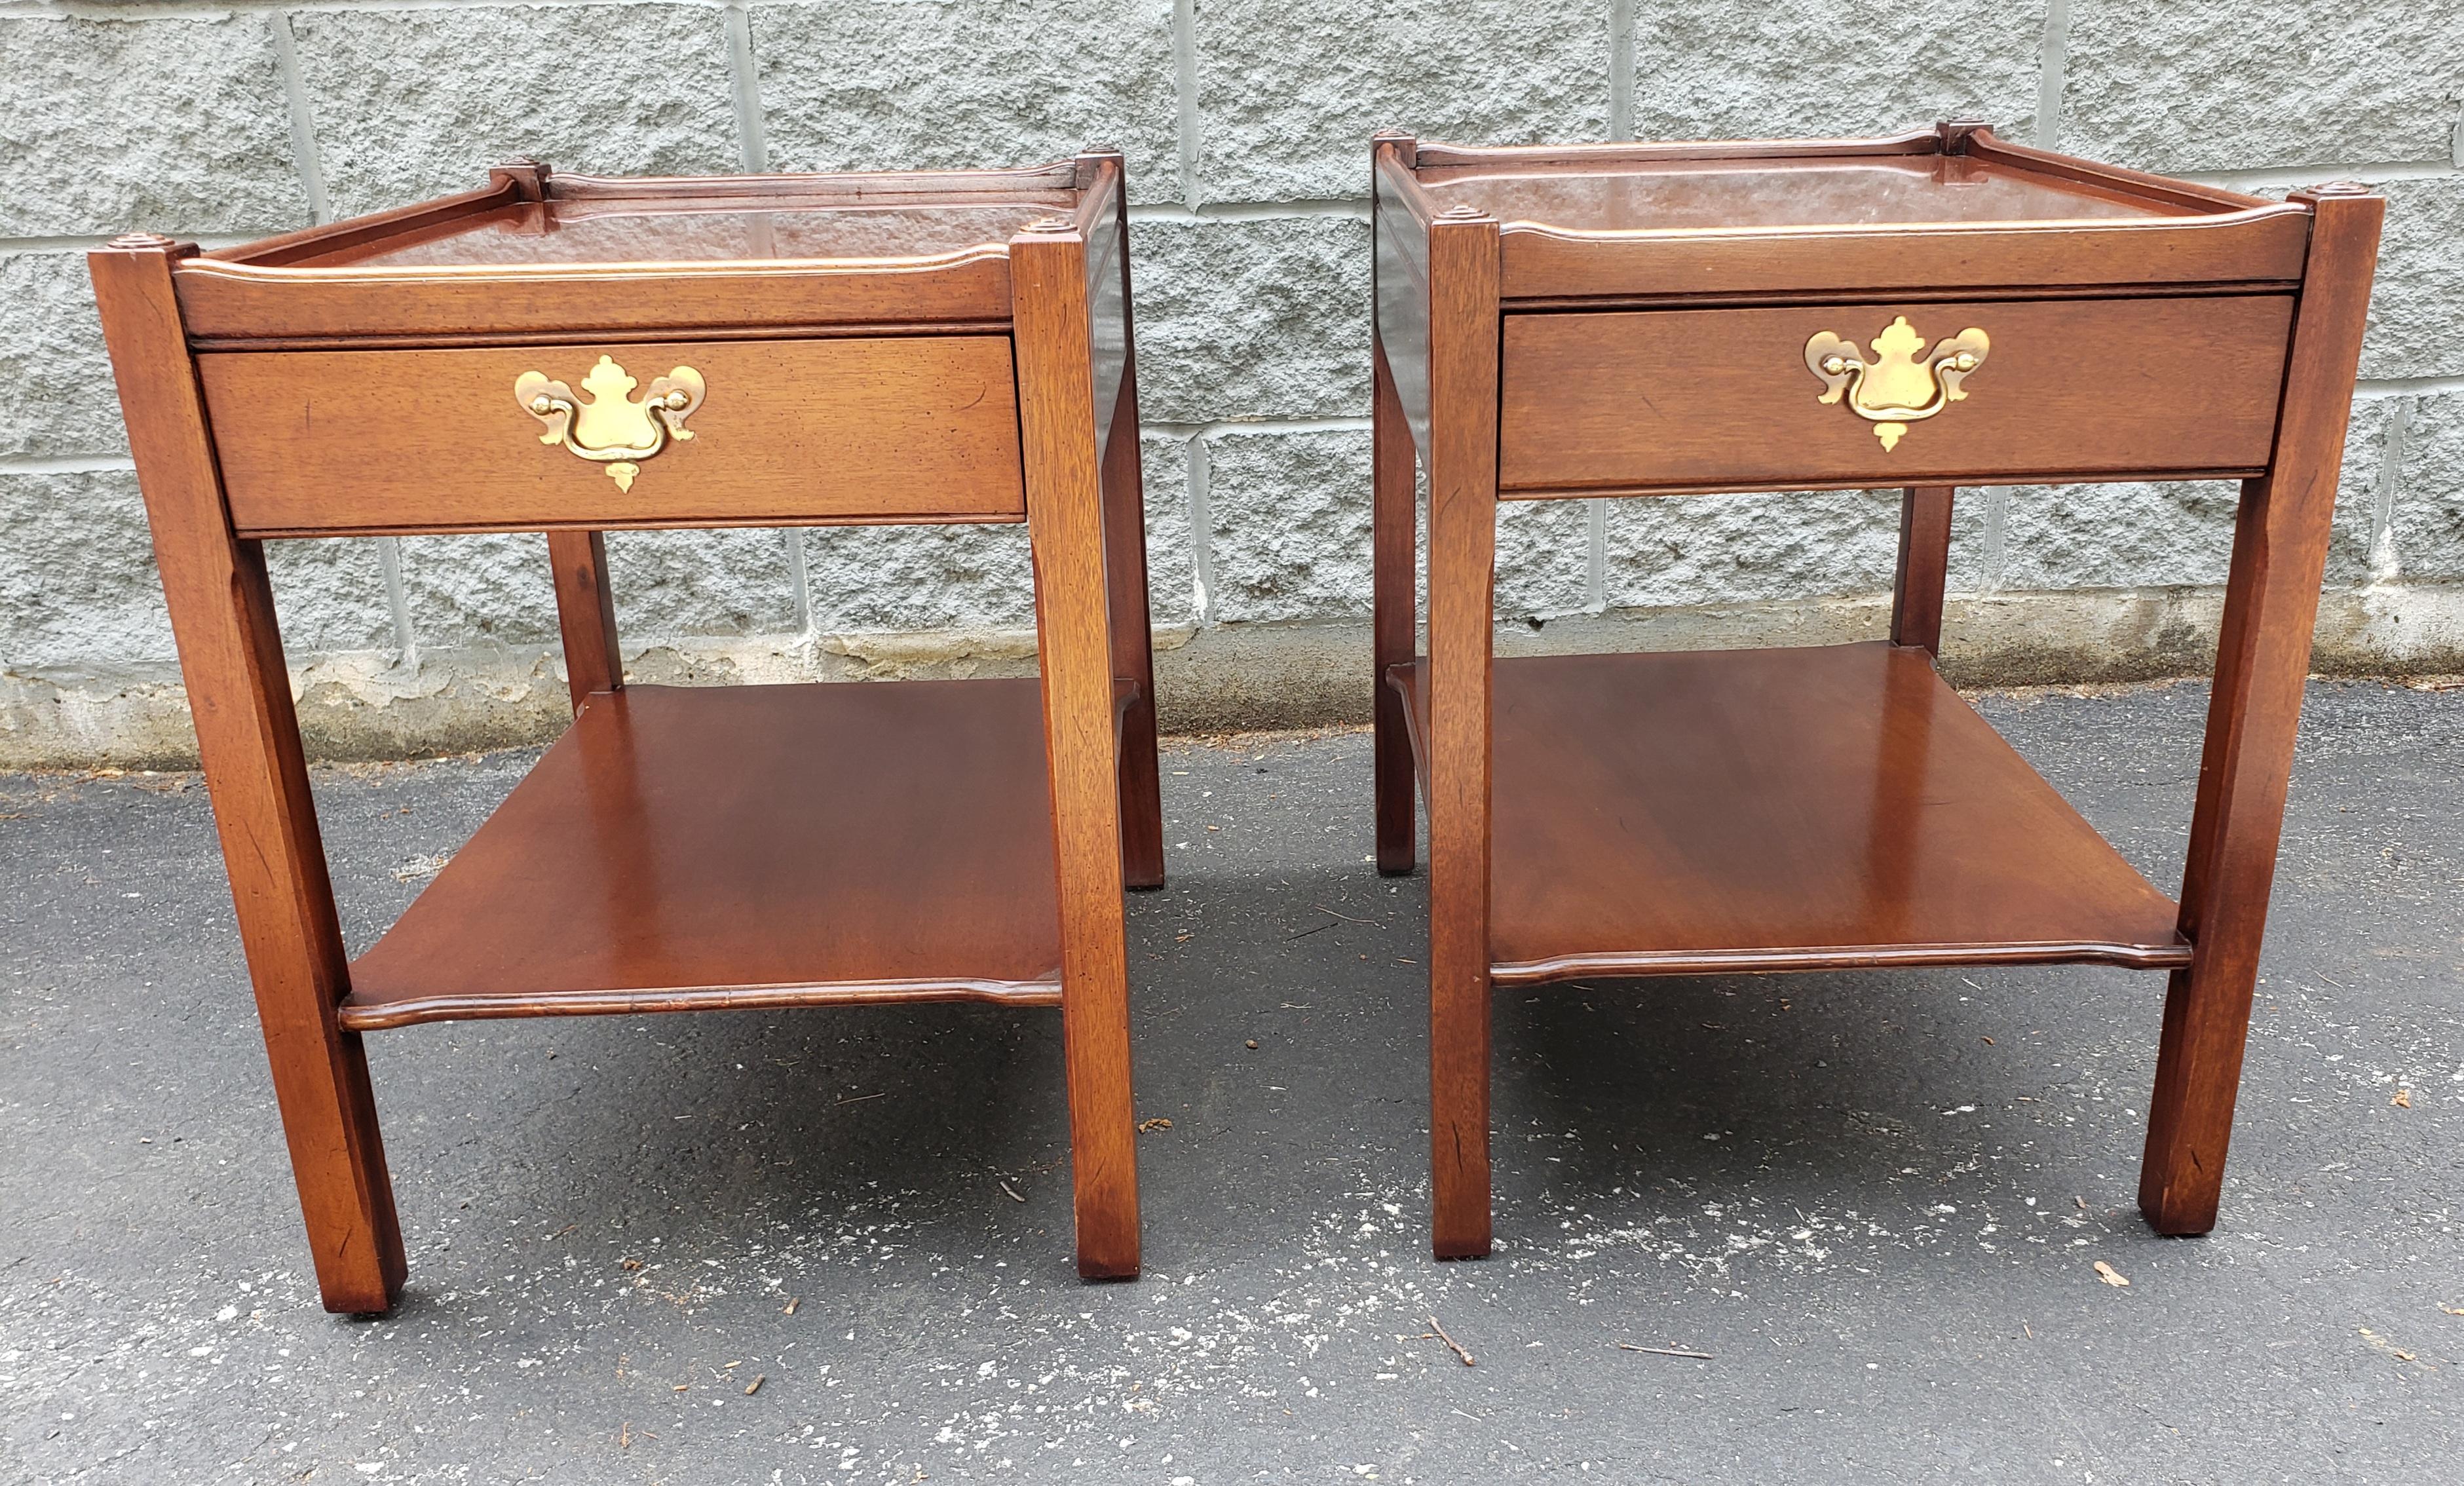 Stained Hickory Chair Co. James River Collection Solid Mahogany Side Tables, a Pair For Sale